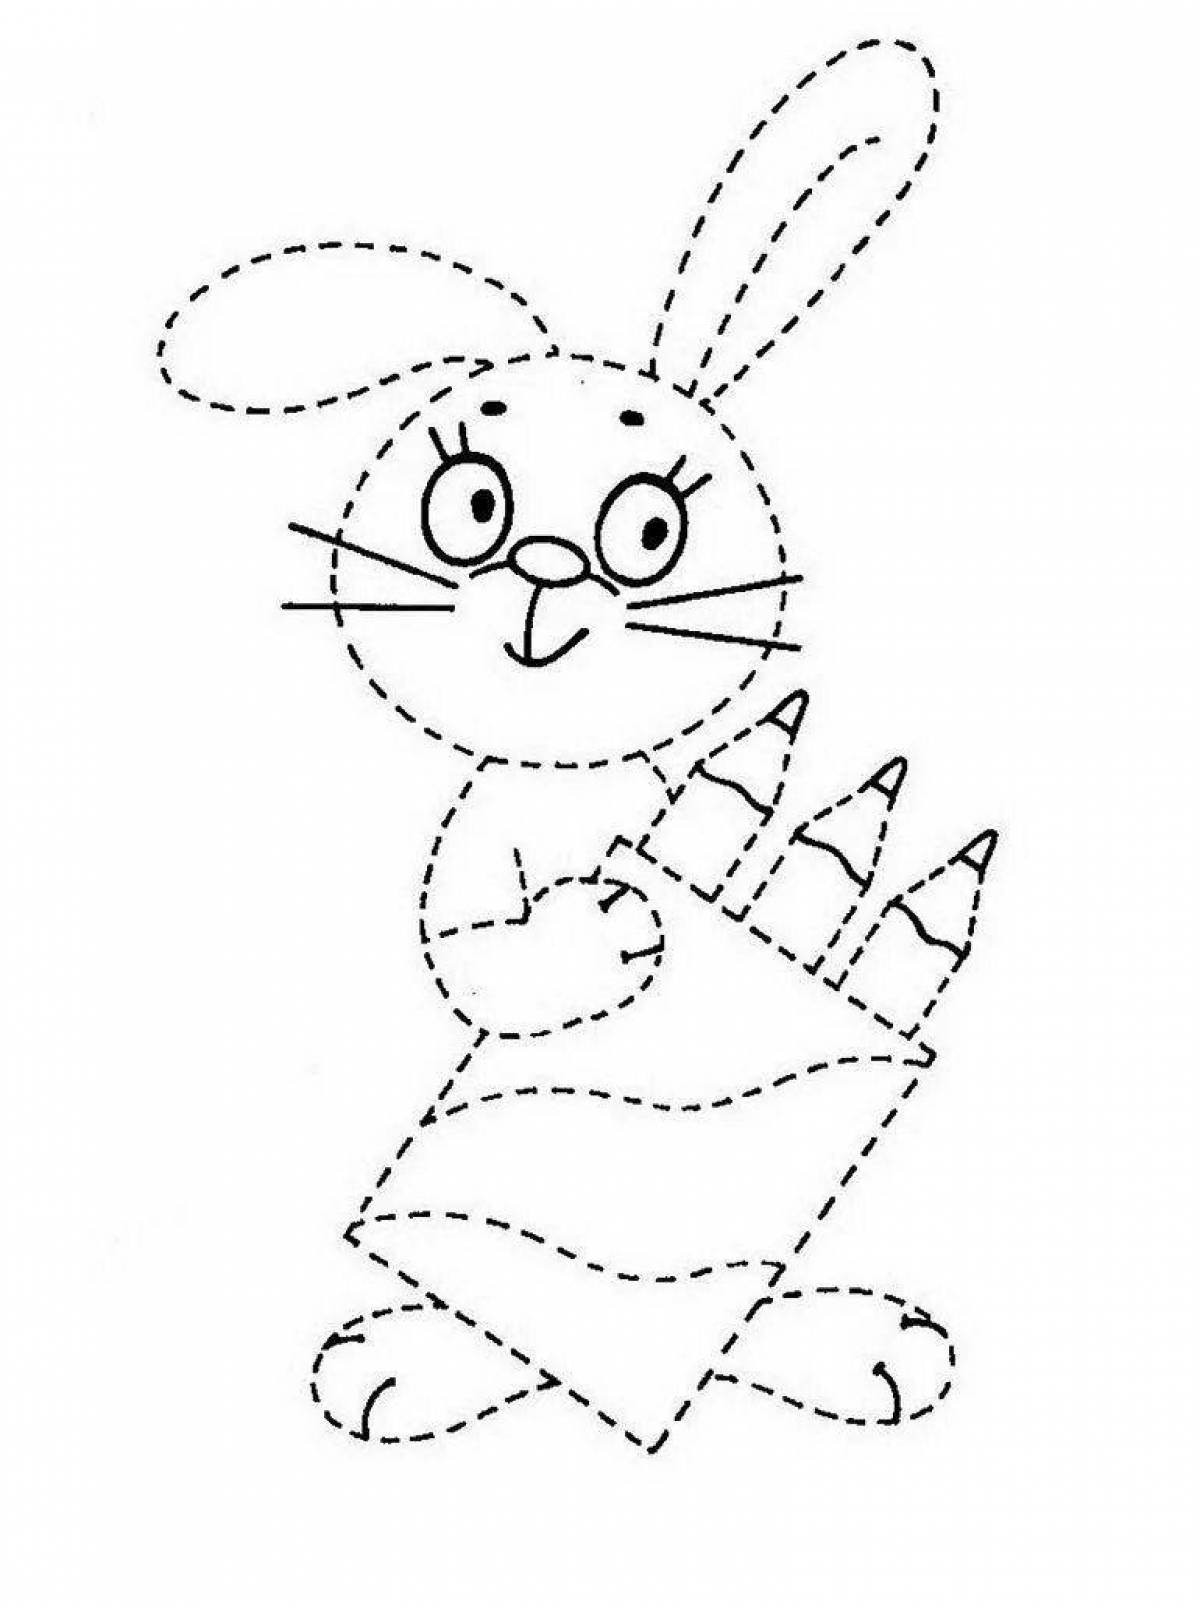 Entertaining coloring dotted lines for children